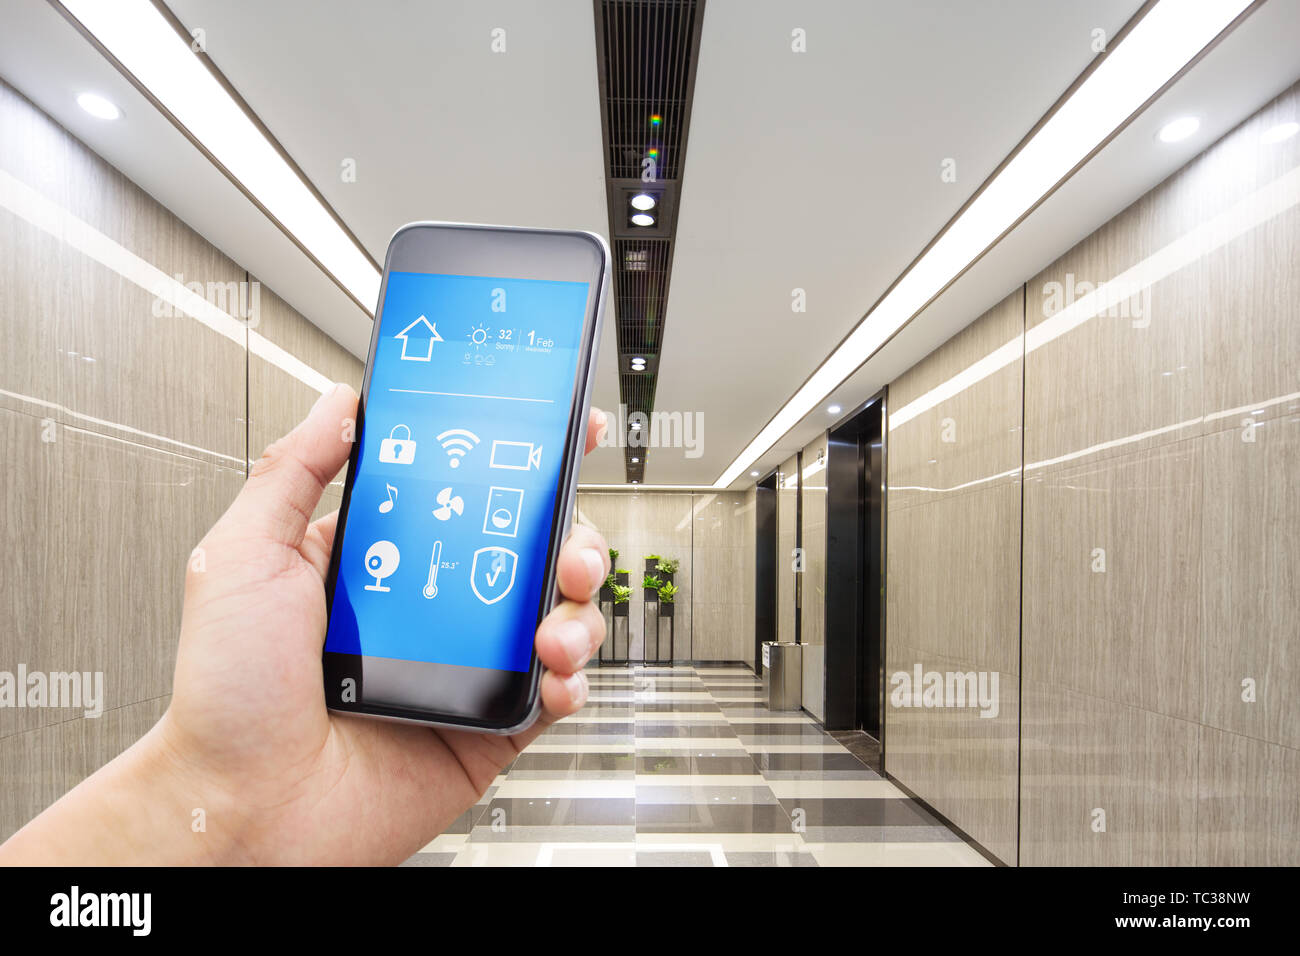 Modern video inside interior design technology in business business modern phone connection Internet screen screen future no one in room touch communication communication family corridor Stock Photo